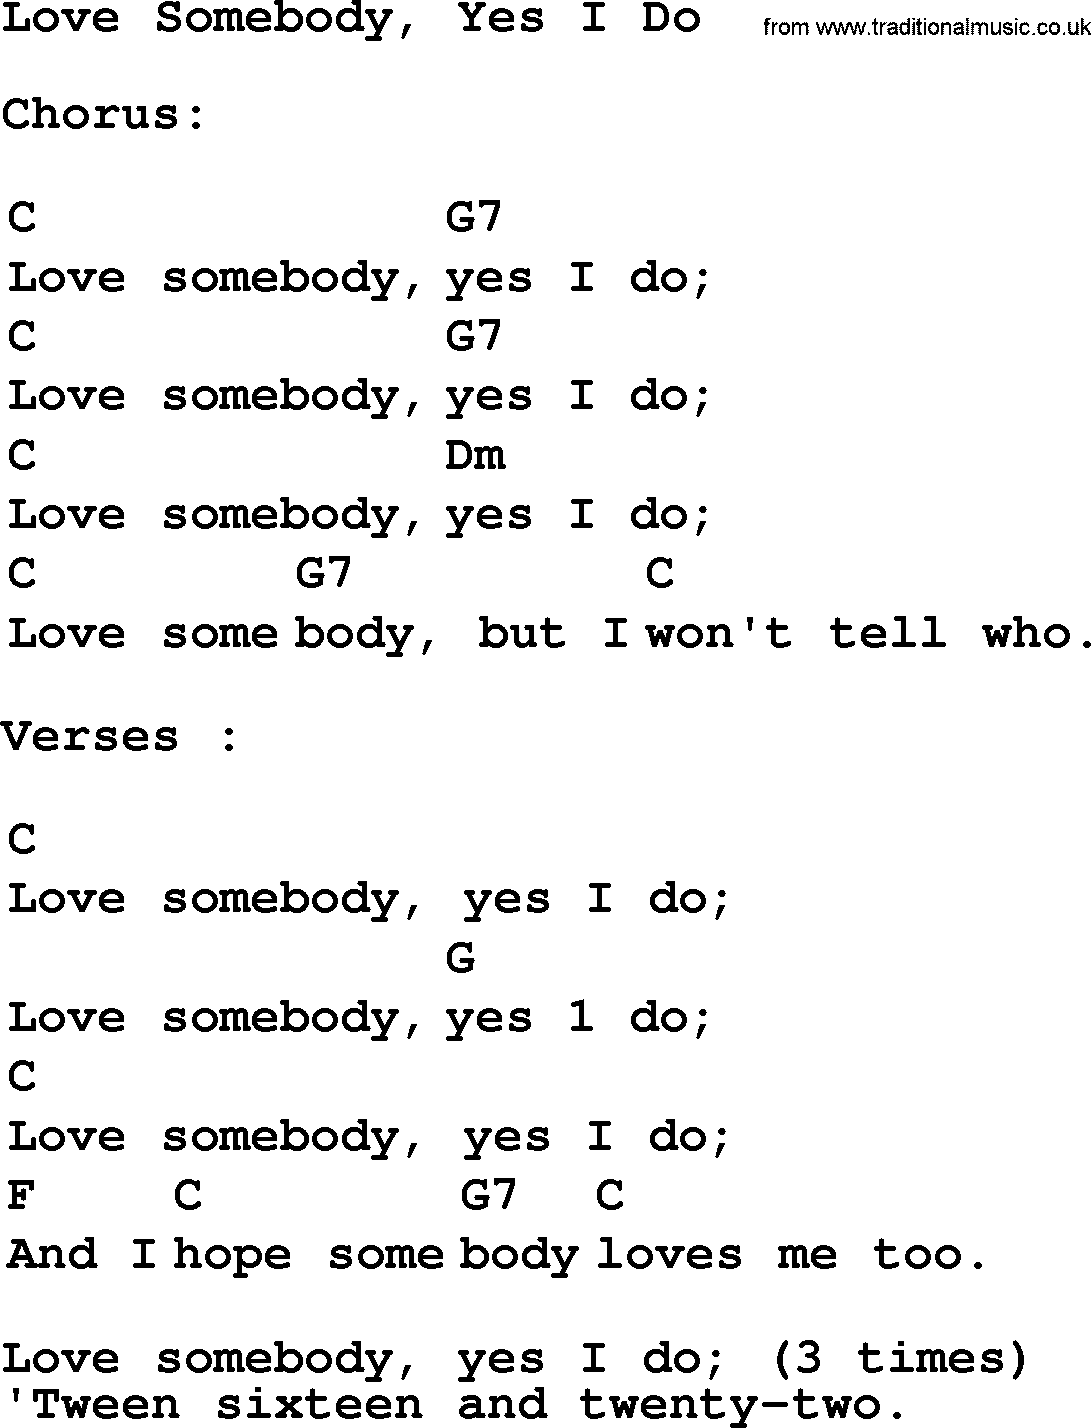 Top 1000 Most Popular Folk and Old-time Songs: Love Somebody, Yes I Do, lyrics and chords